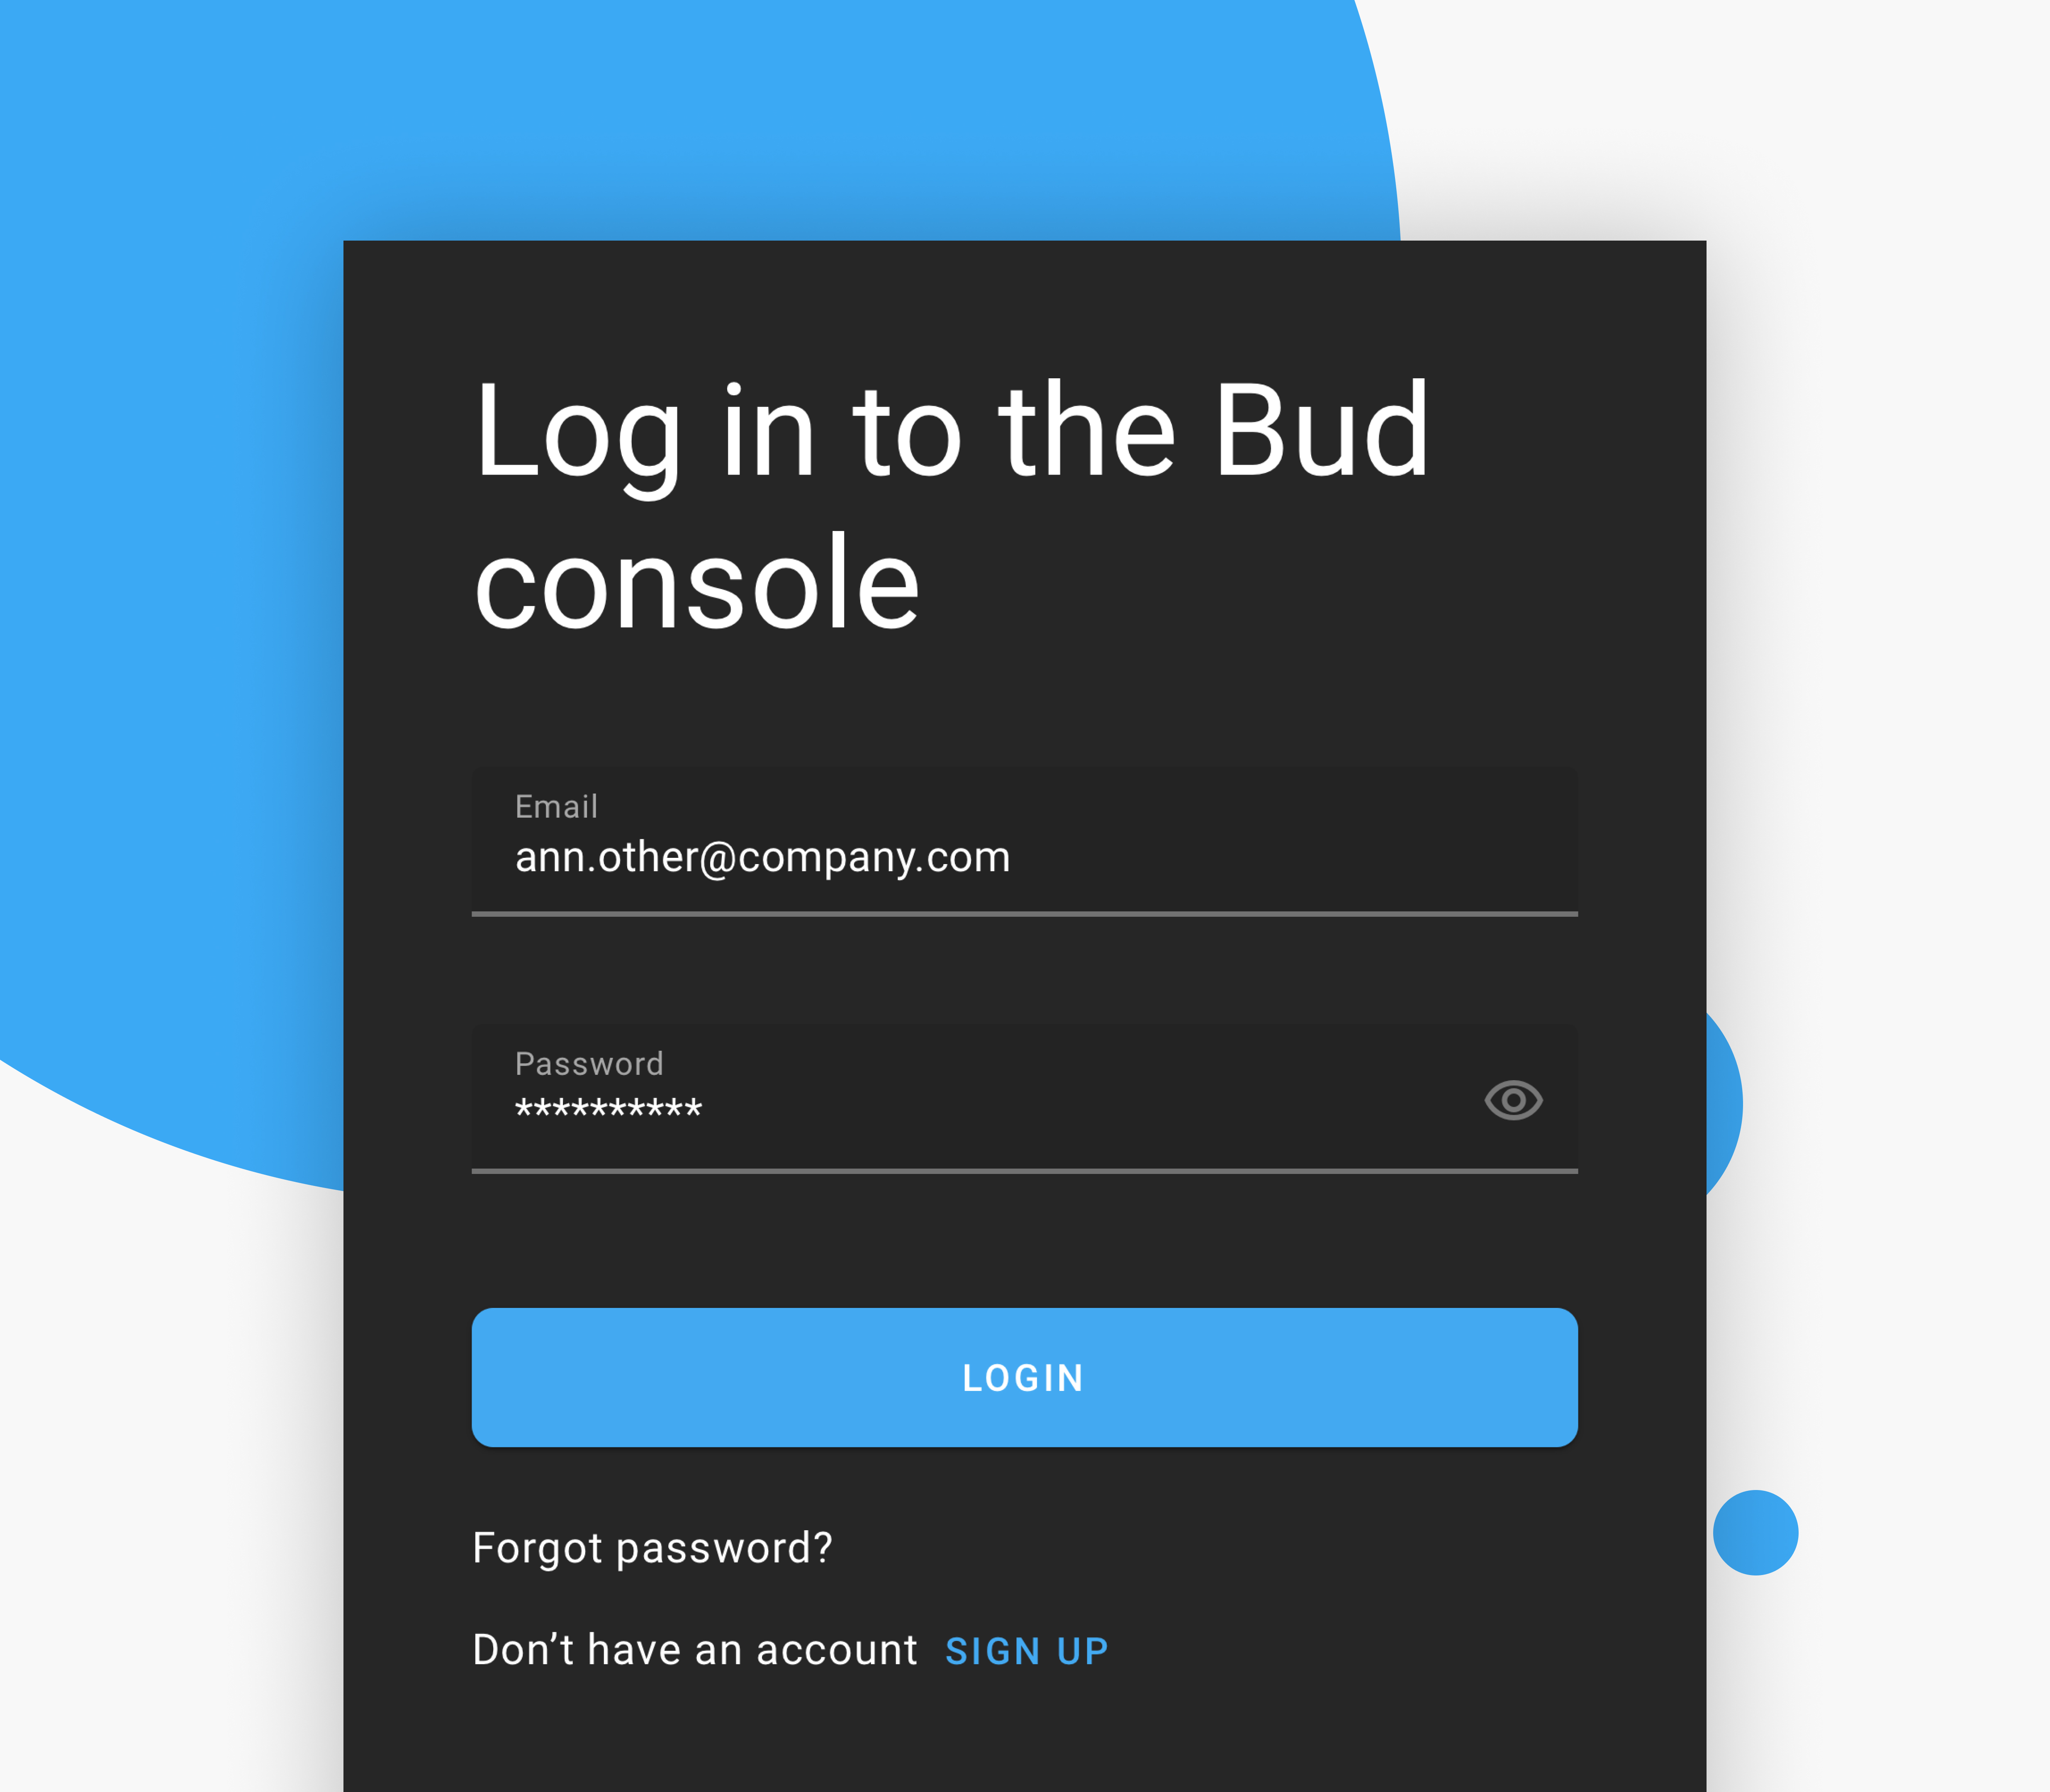 Sign-up and login to Bud's Developer Console